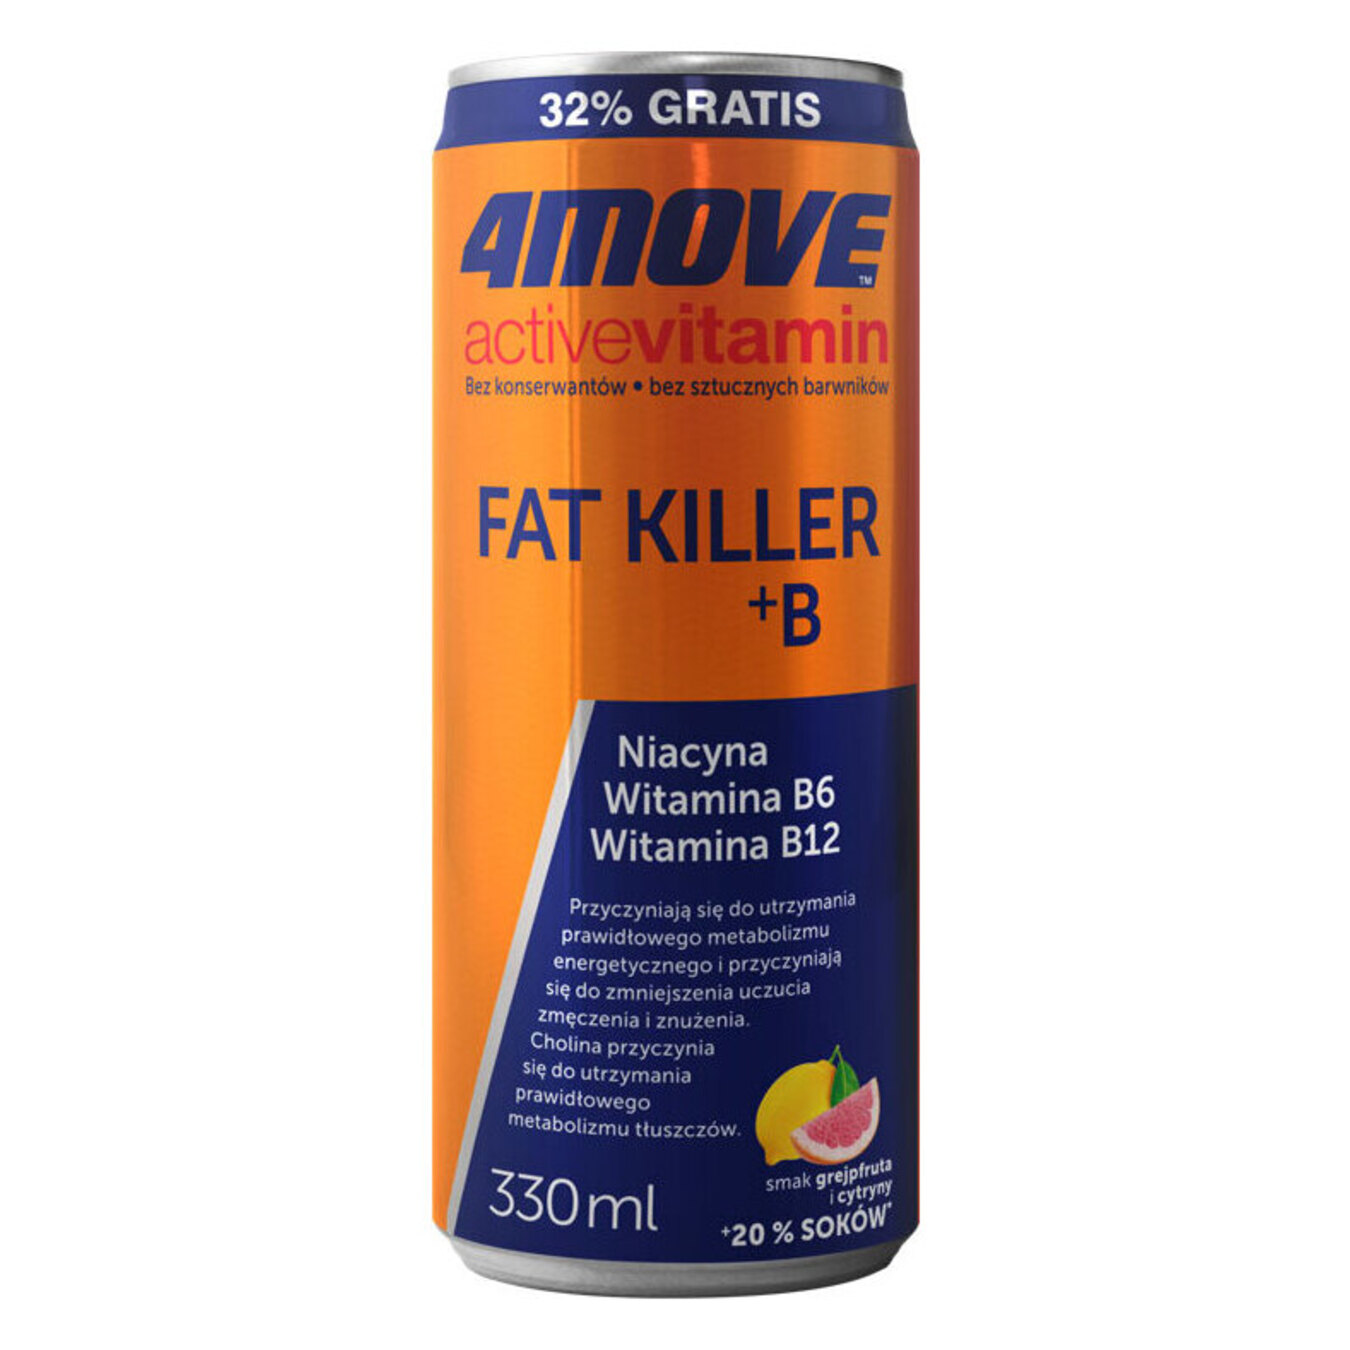 Carbonated drink 4Move Fat Killer 0.33 l iron can